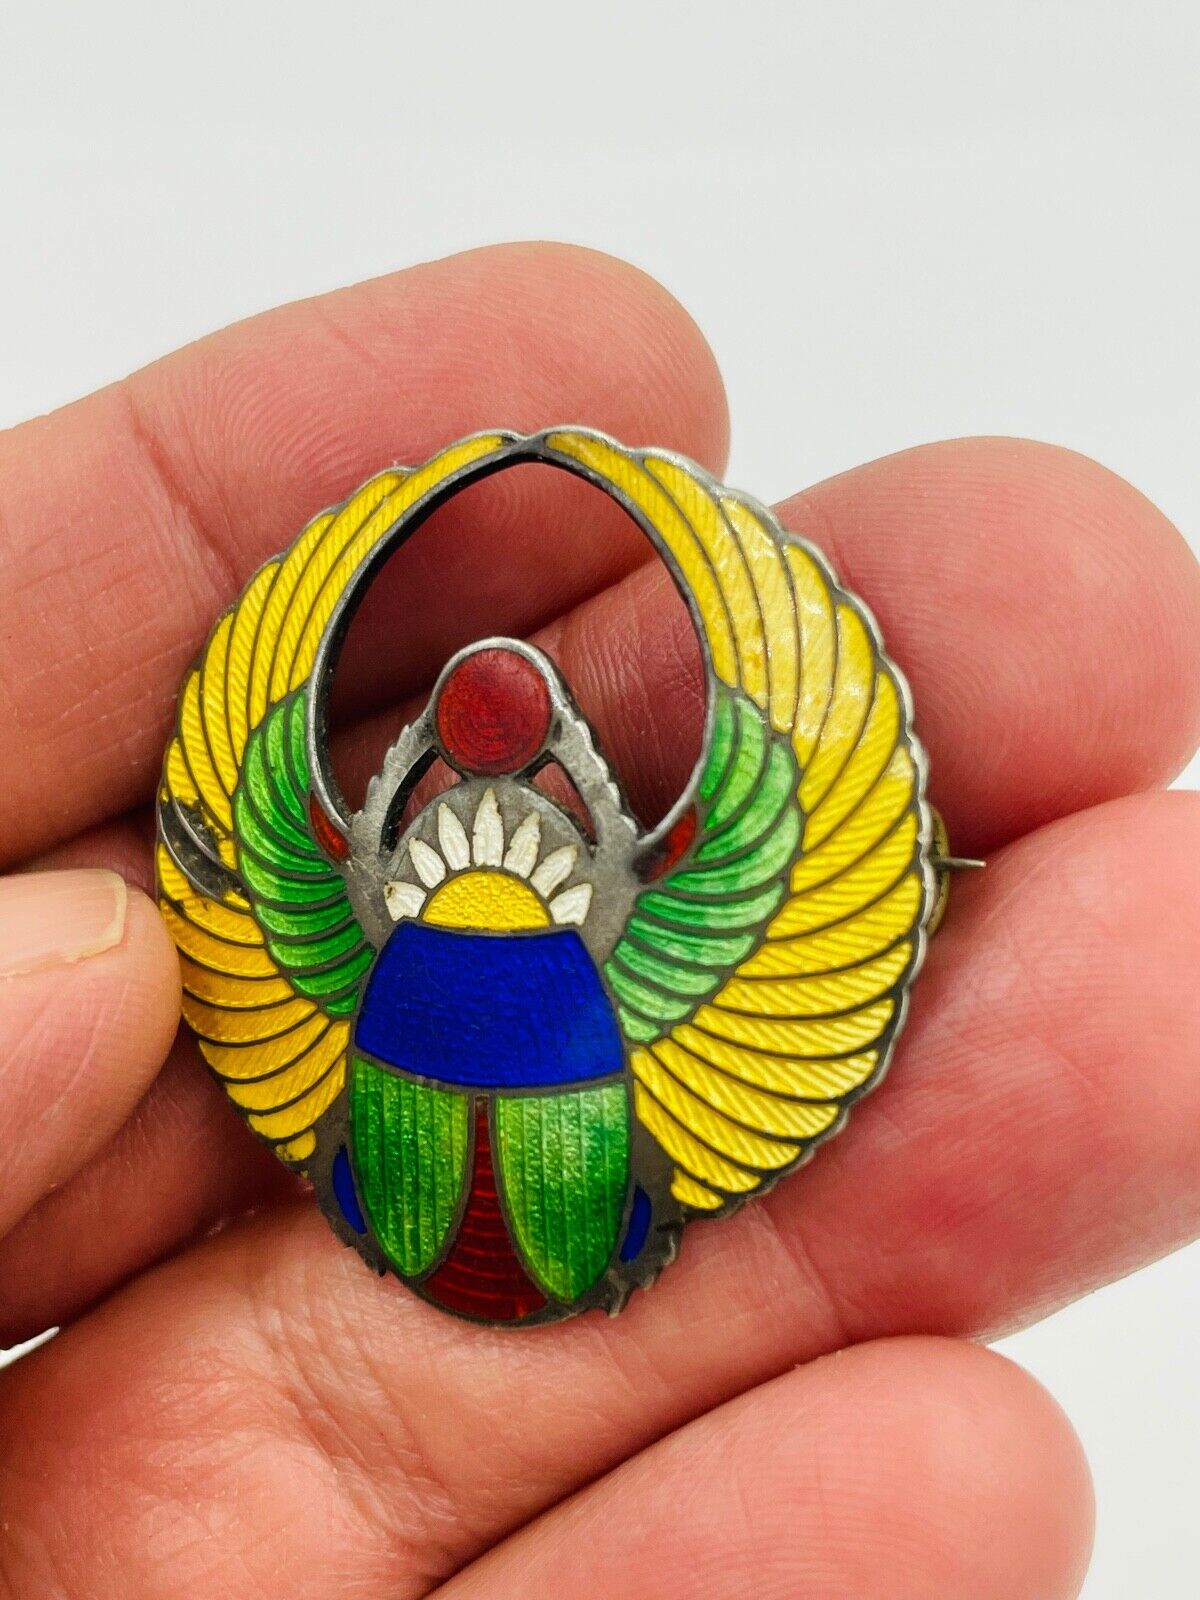 Shepard Mfg Co Sterling and Cloisonne Enamel Deco Egyptian Revival Winged Scarab